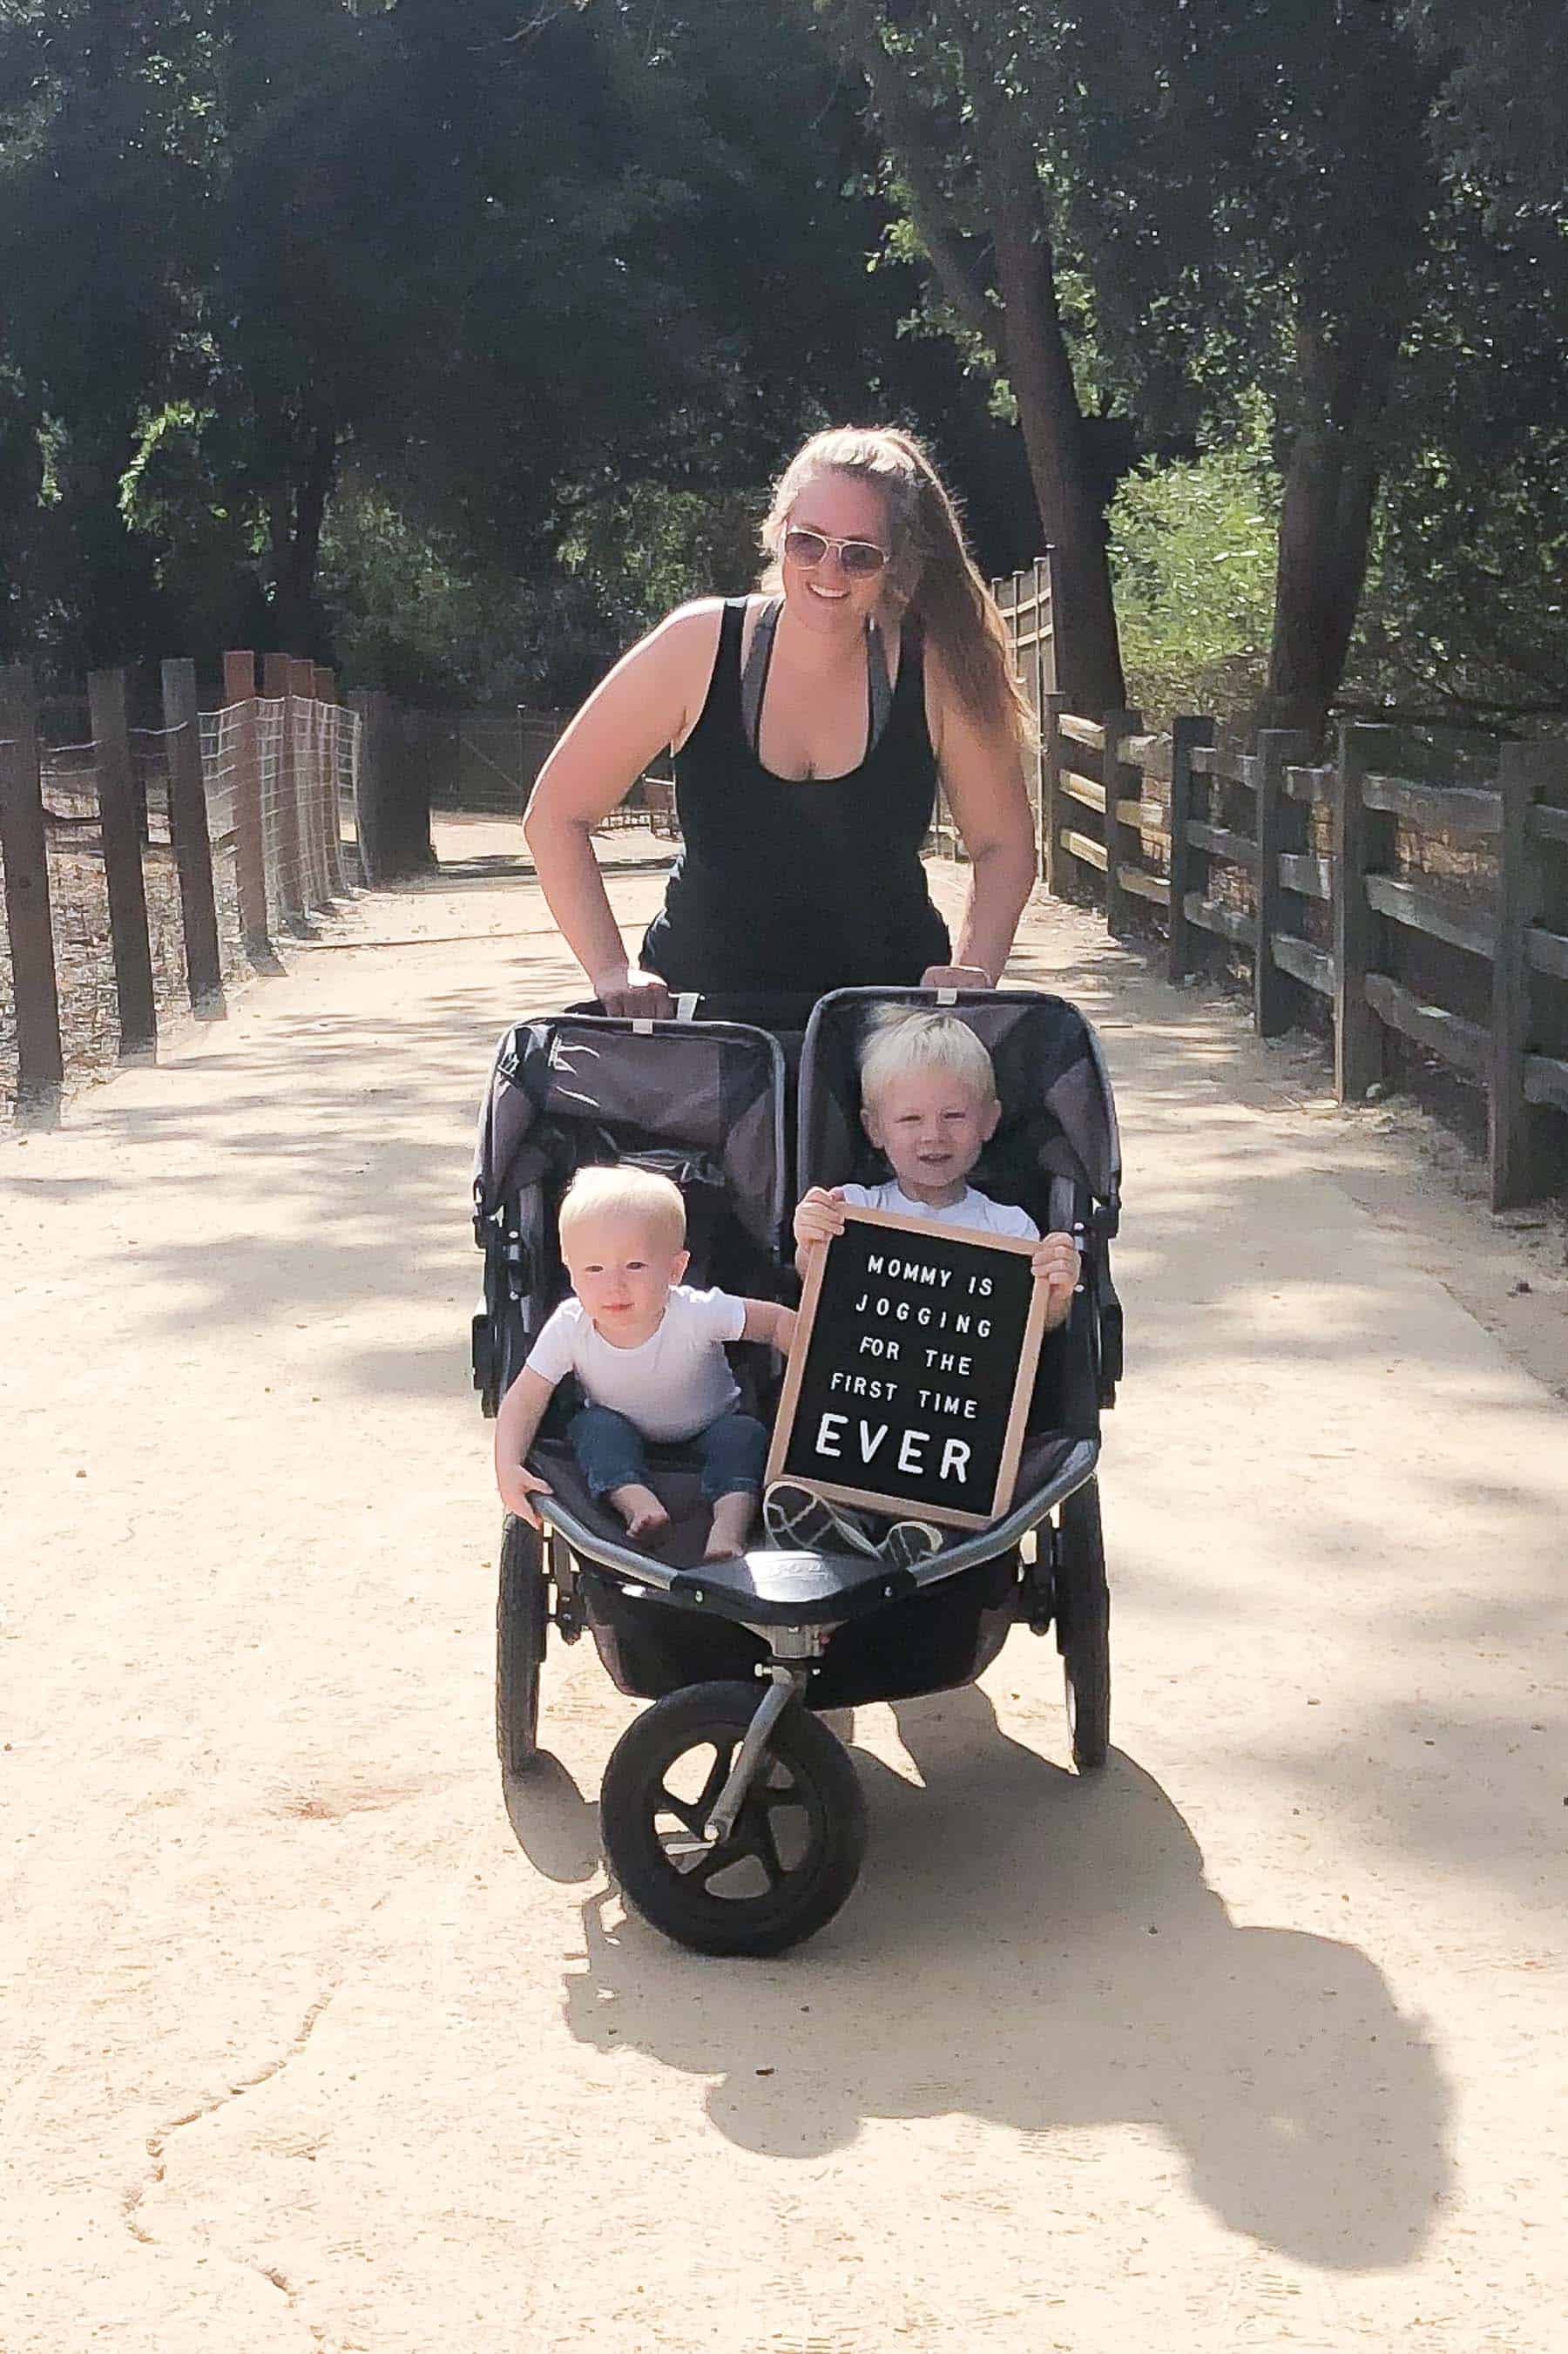 Mom pushing her 2 boys in a double stroller with a letterboard message saying Mommy is jogging for the first time ever